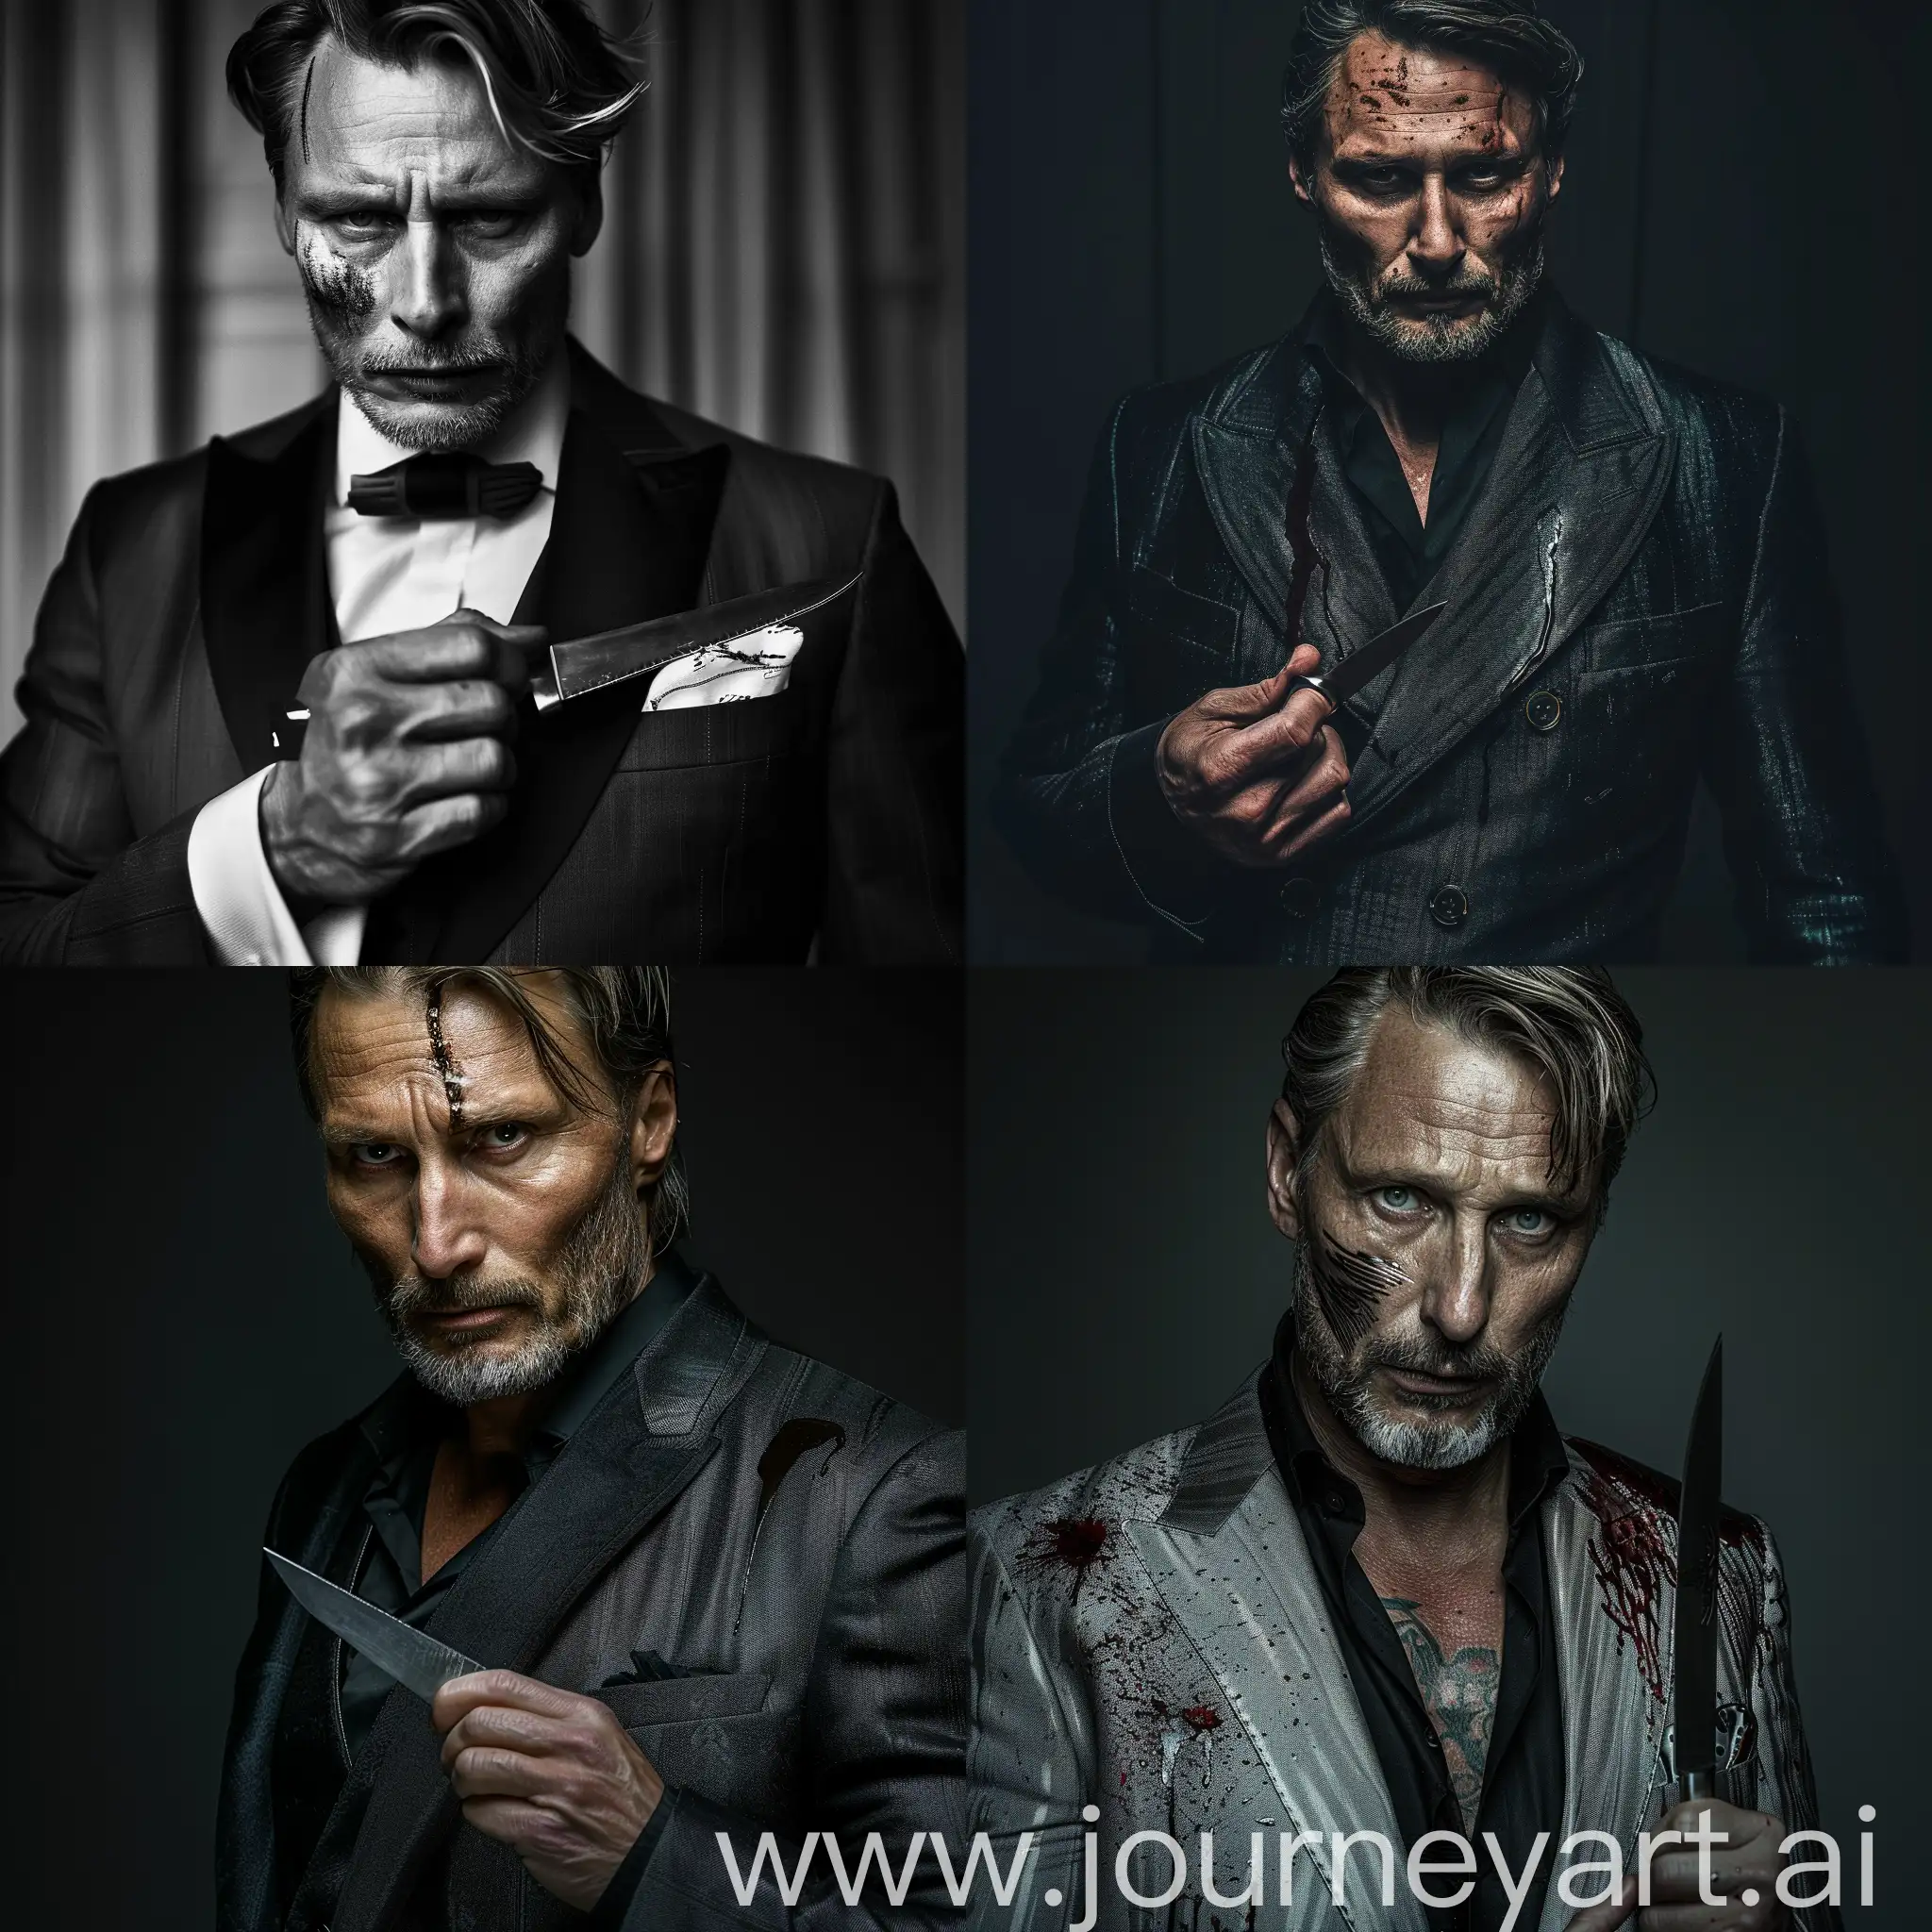 Mads Mikkelsen in luxury suit. Shaved face. He has a knife on his hand. Cinematic shot. Realistic image.